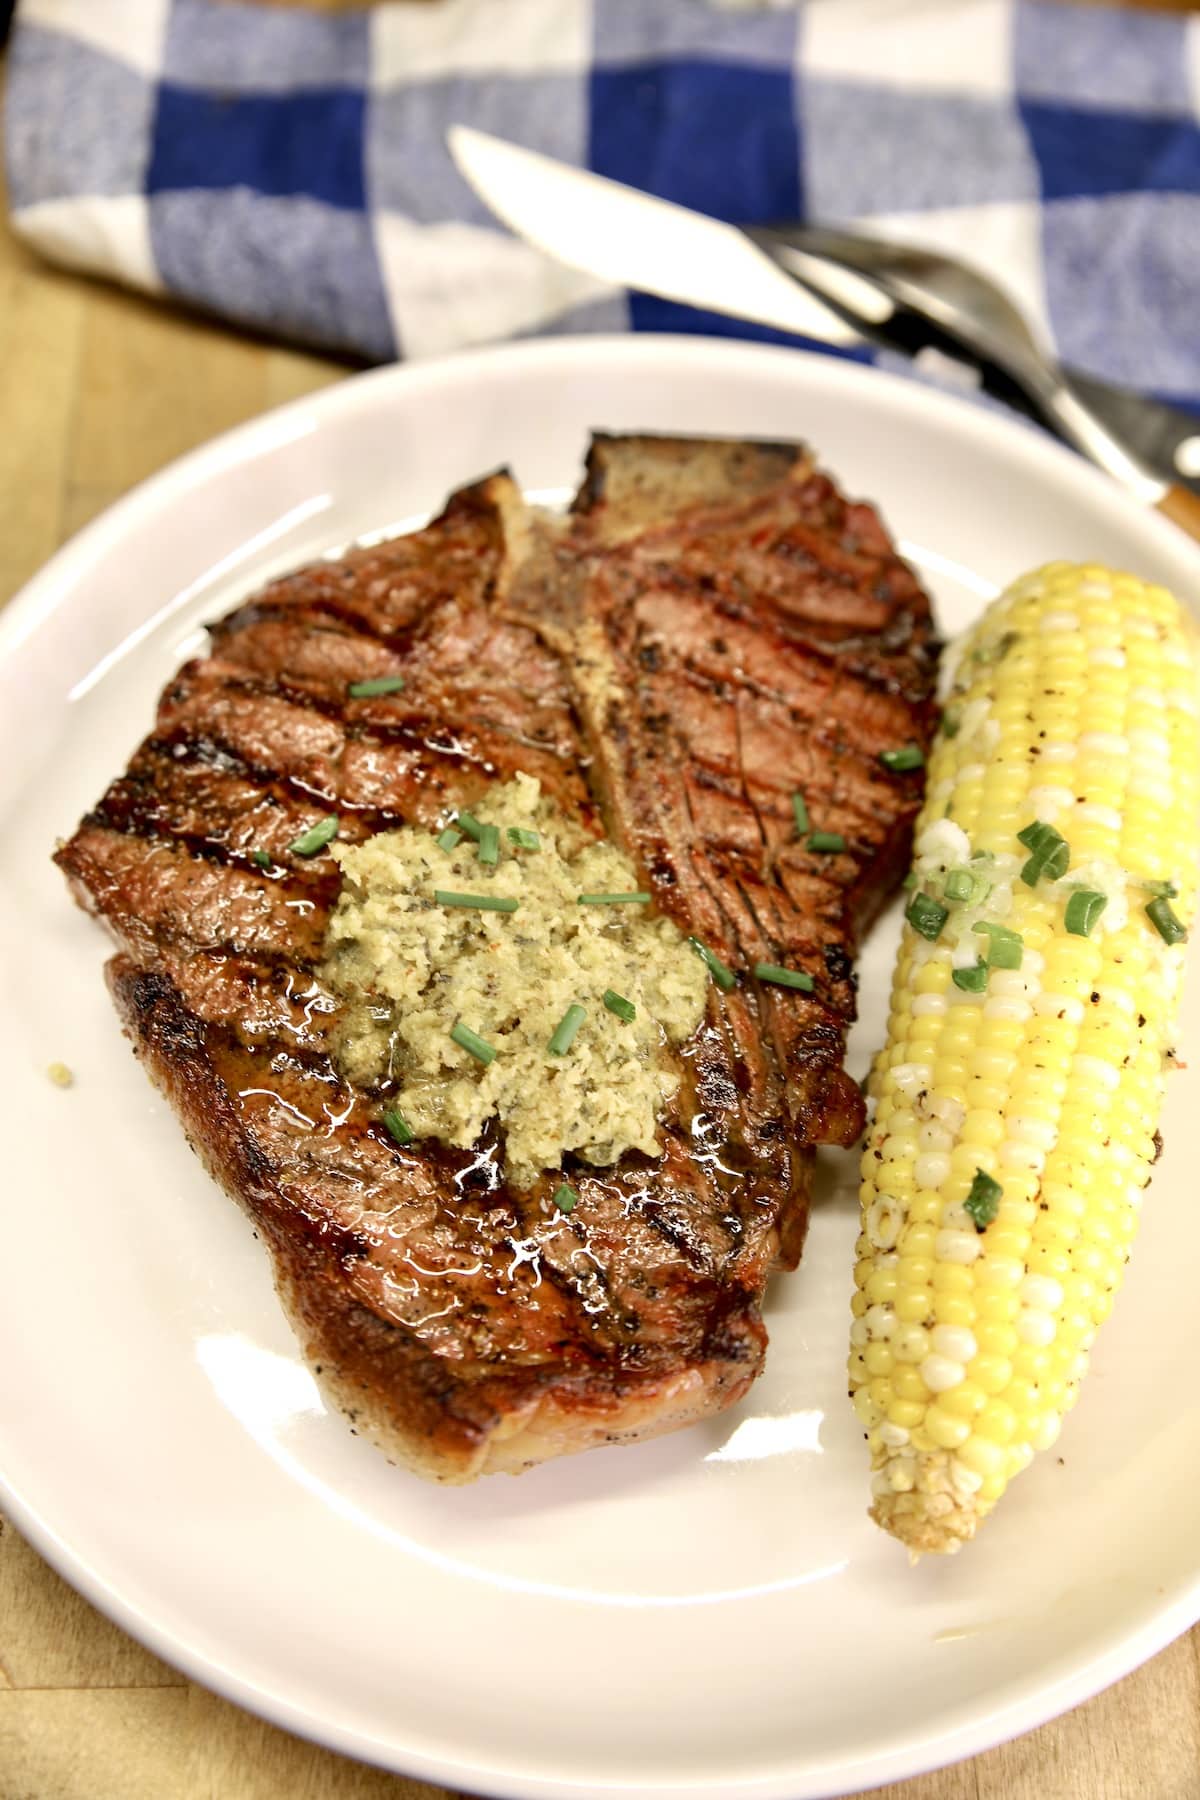 Plate of grilled T-Bone steak topped with butter, corn on the cob.